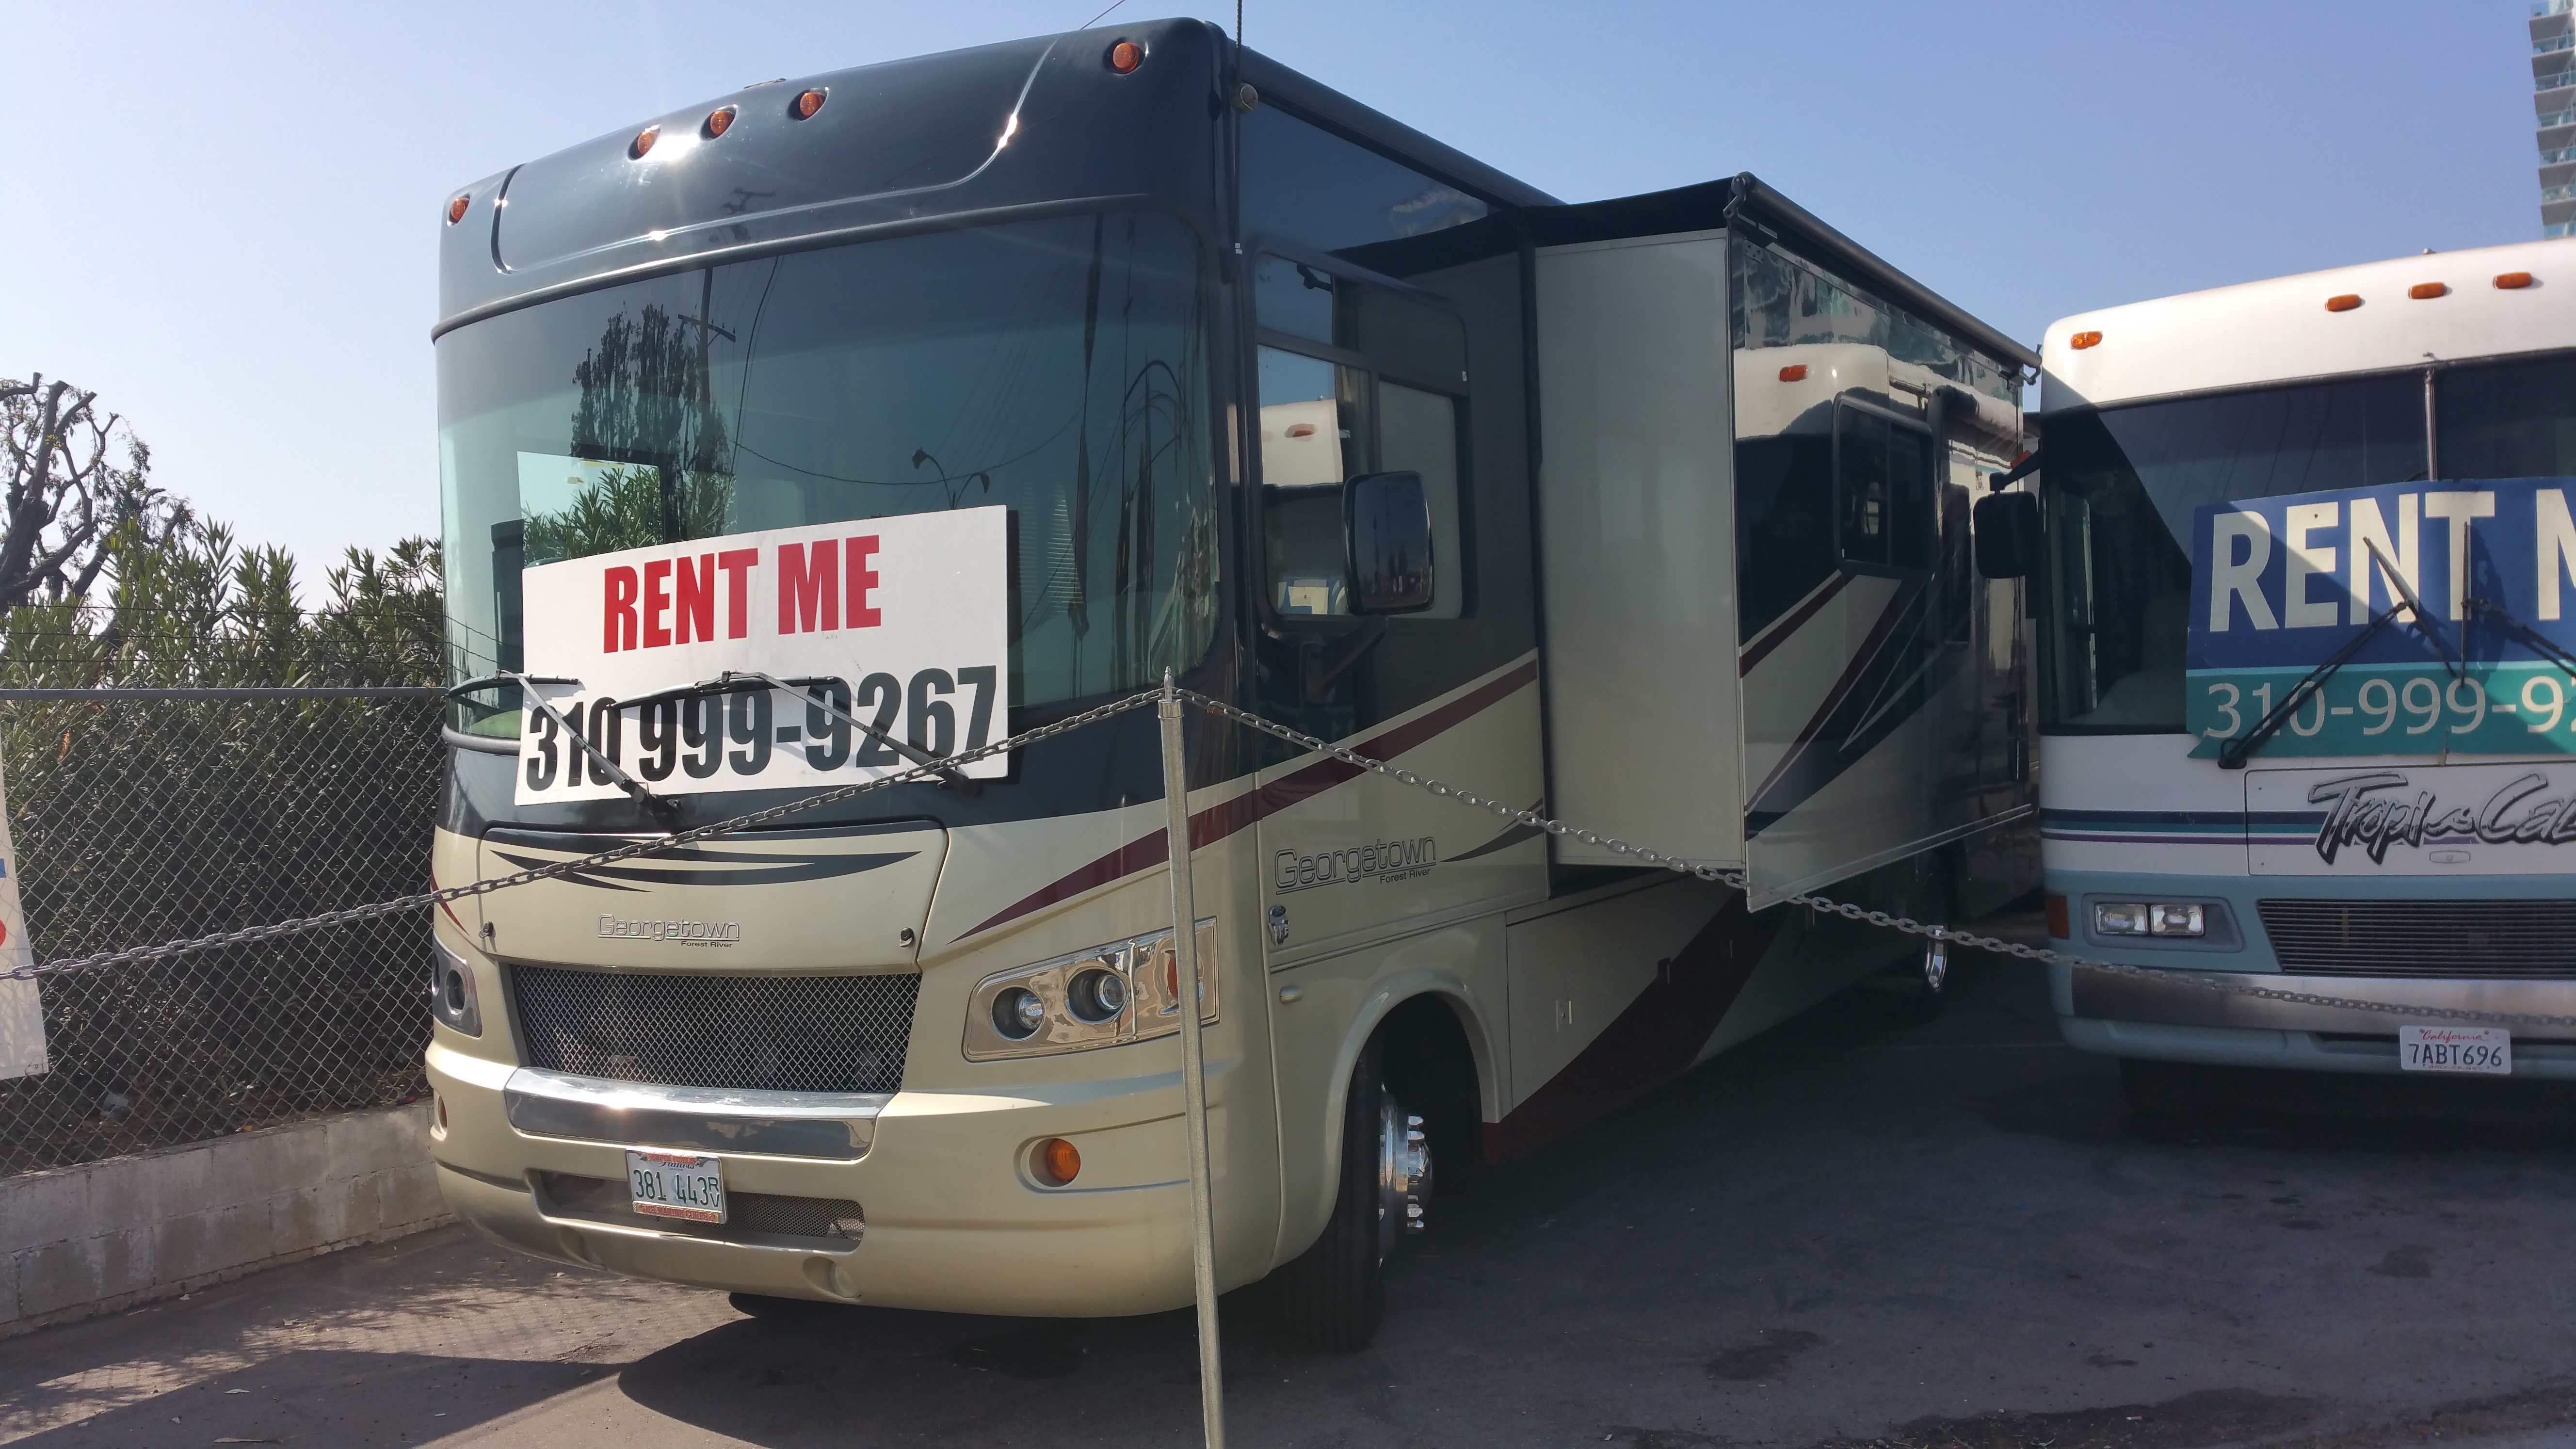 Oceans 11 RV Rentals Coupons near me in Wilmington, CA 90744 | 8coupons